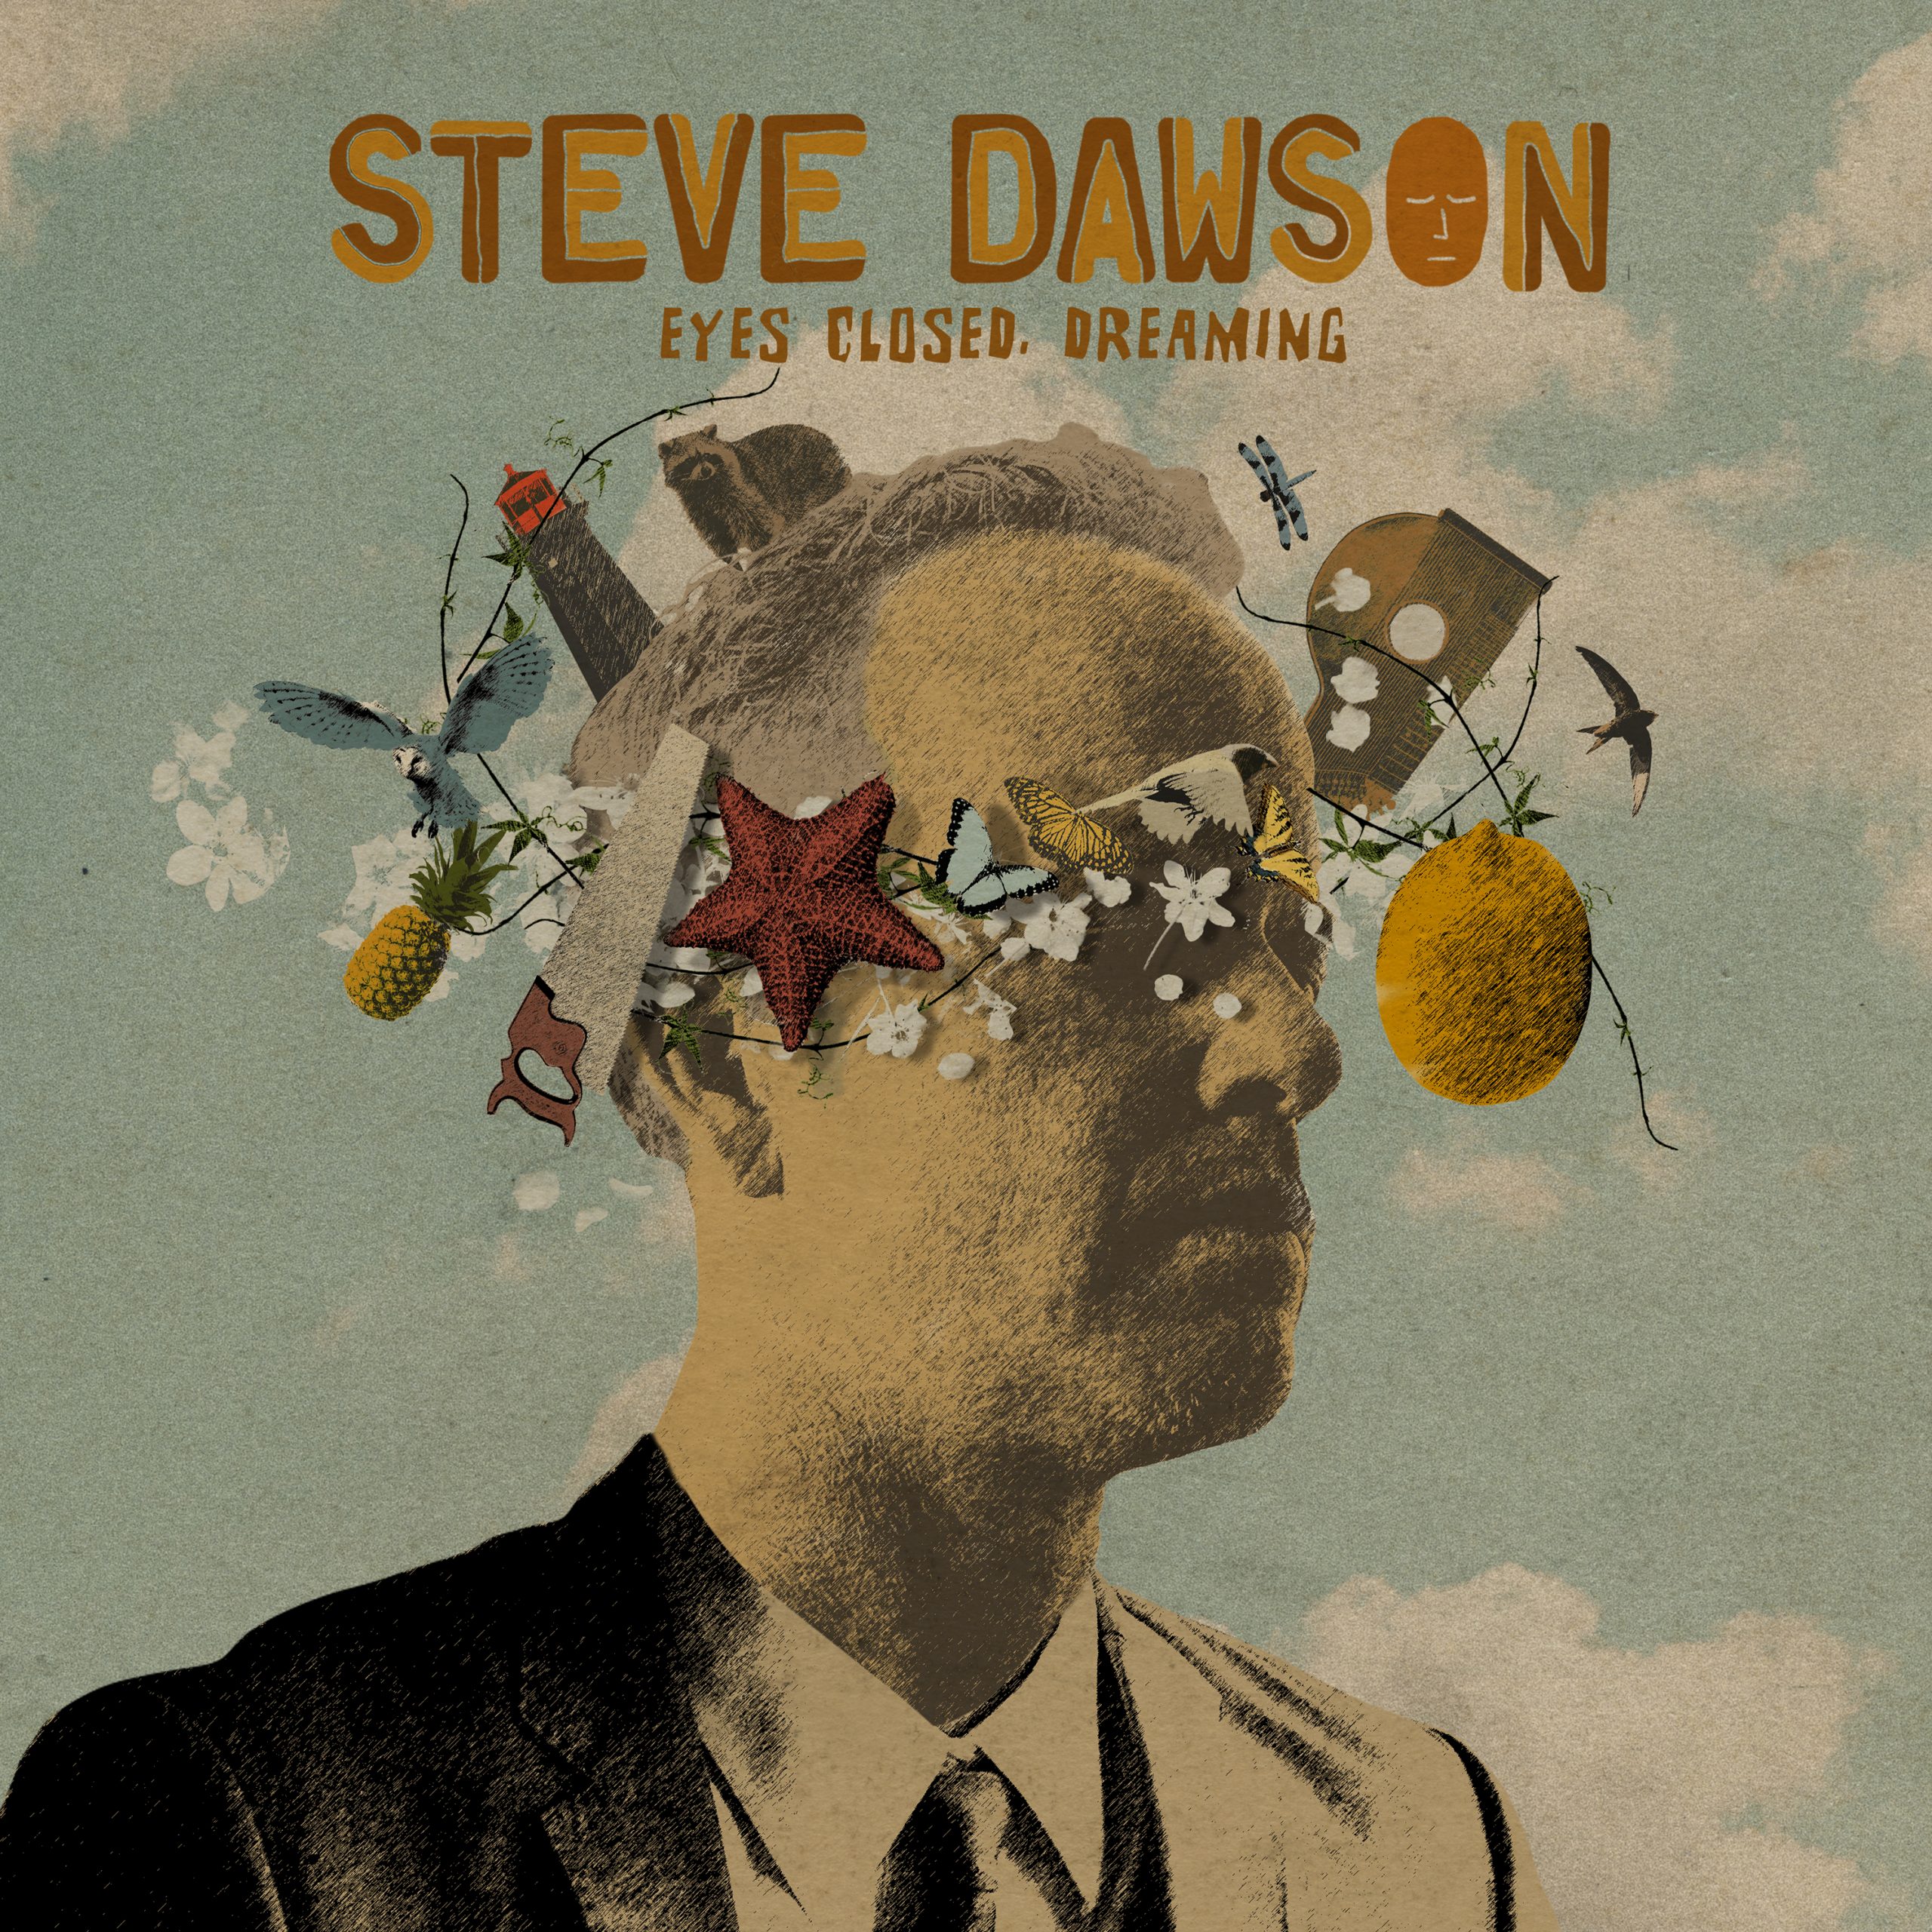 Steve Dawson Has His "Eyes Closed, Dreaming" on New CD Coming March 24th